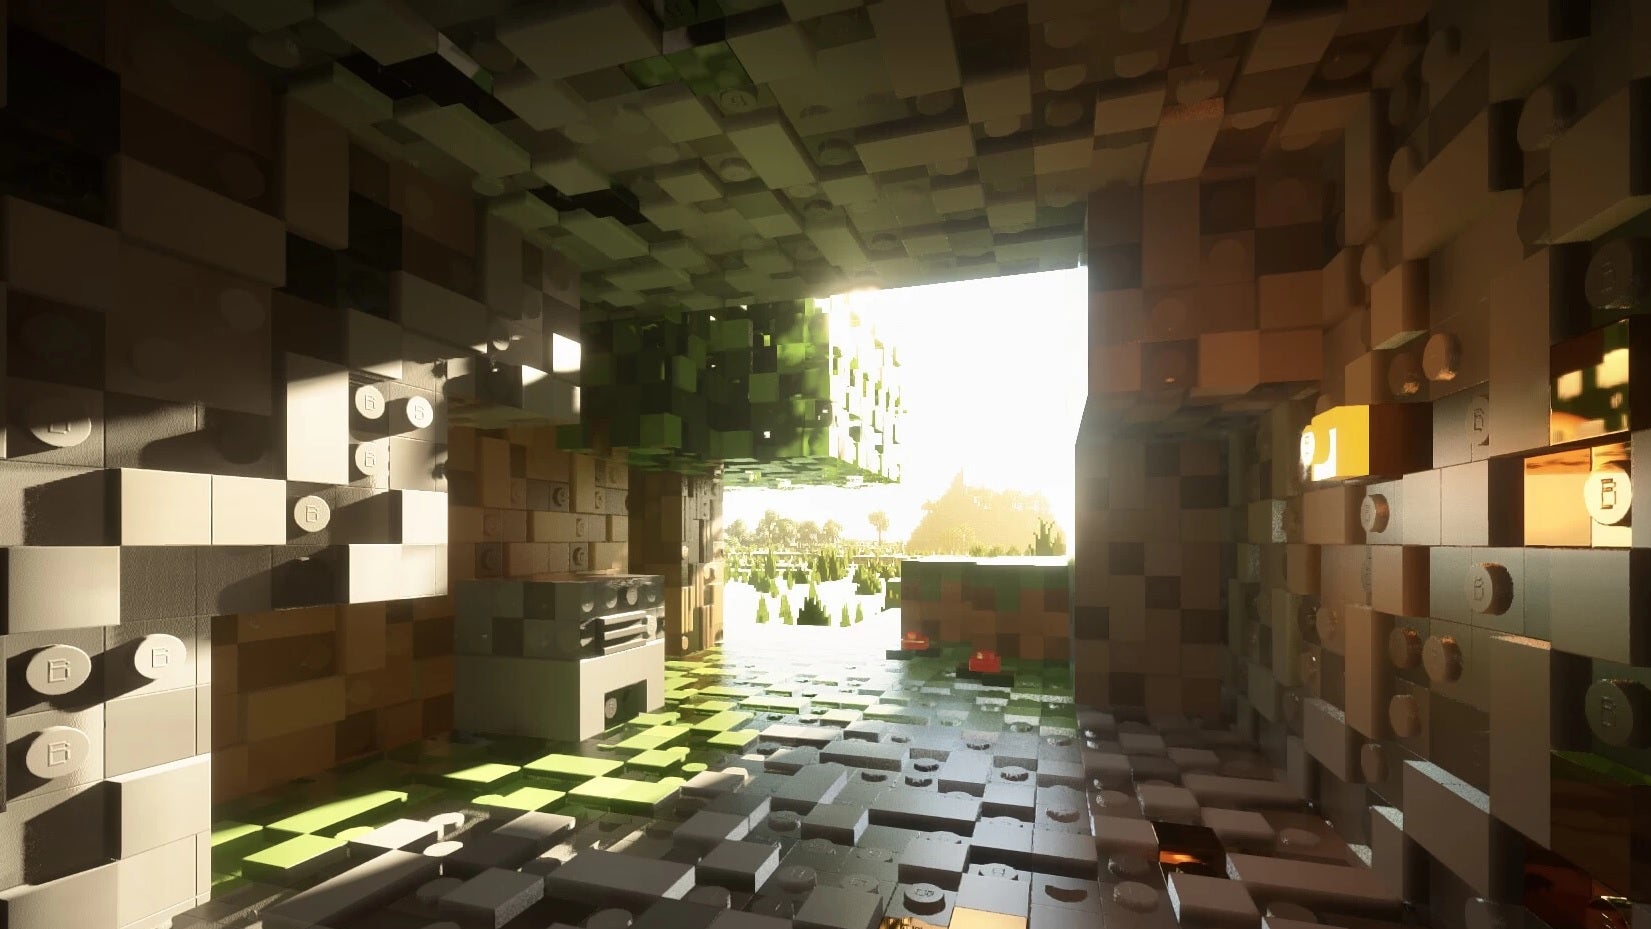 Minecraft Brixel resource pack - A screenshot from inside a cave looking into the sun with shaders enabled. All of the blocks appear to be made of shiny, bumpy Lego-like bricks.